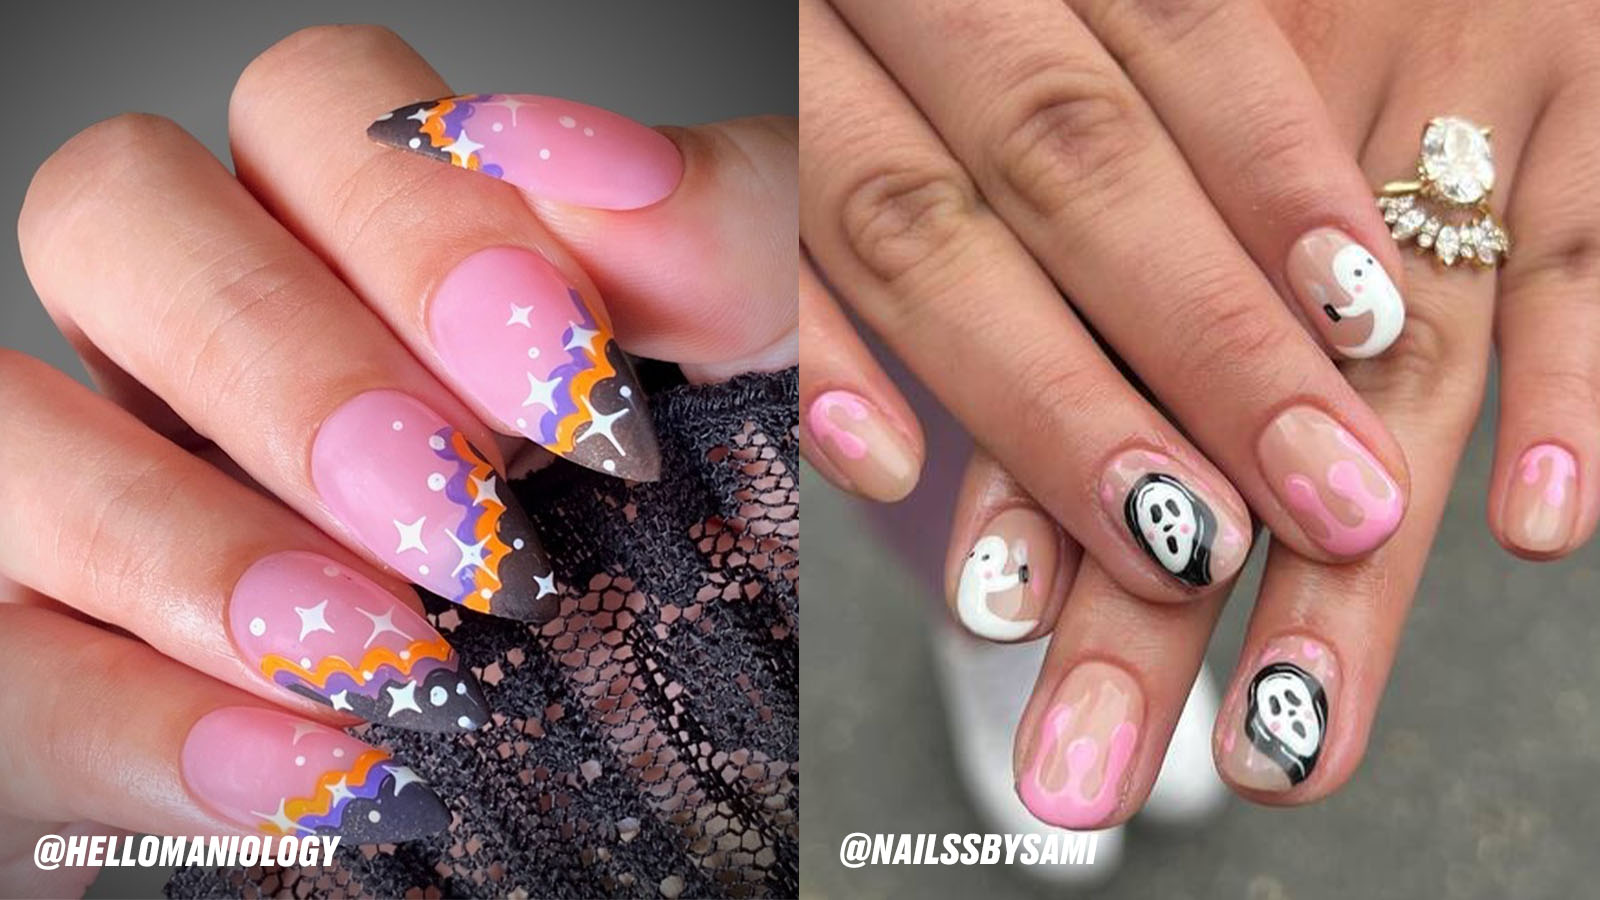 3. "Spooky and Cute Halloween Nail Ideas for Short Nails" - wide 5